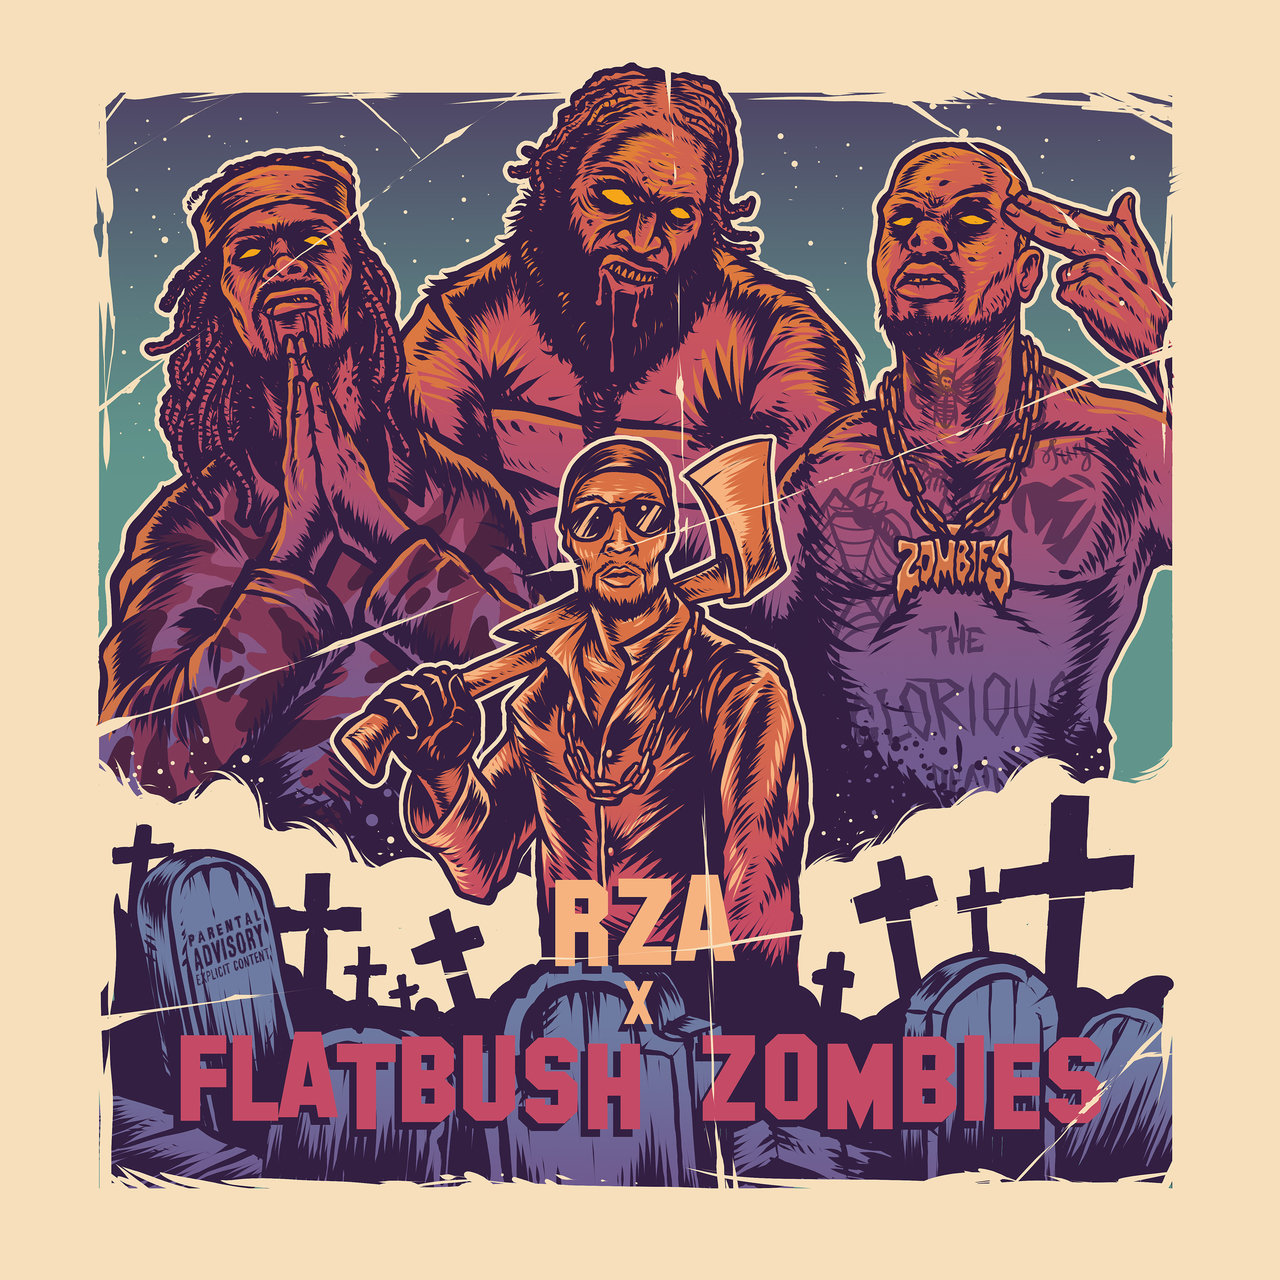 RZA & Flatbush Zombies’s Double-Feature Continues With “Quentin Tarantino”